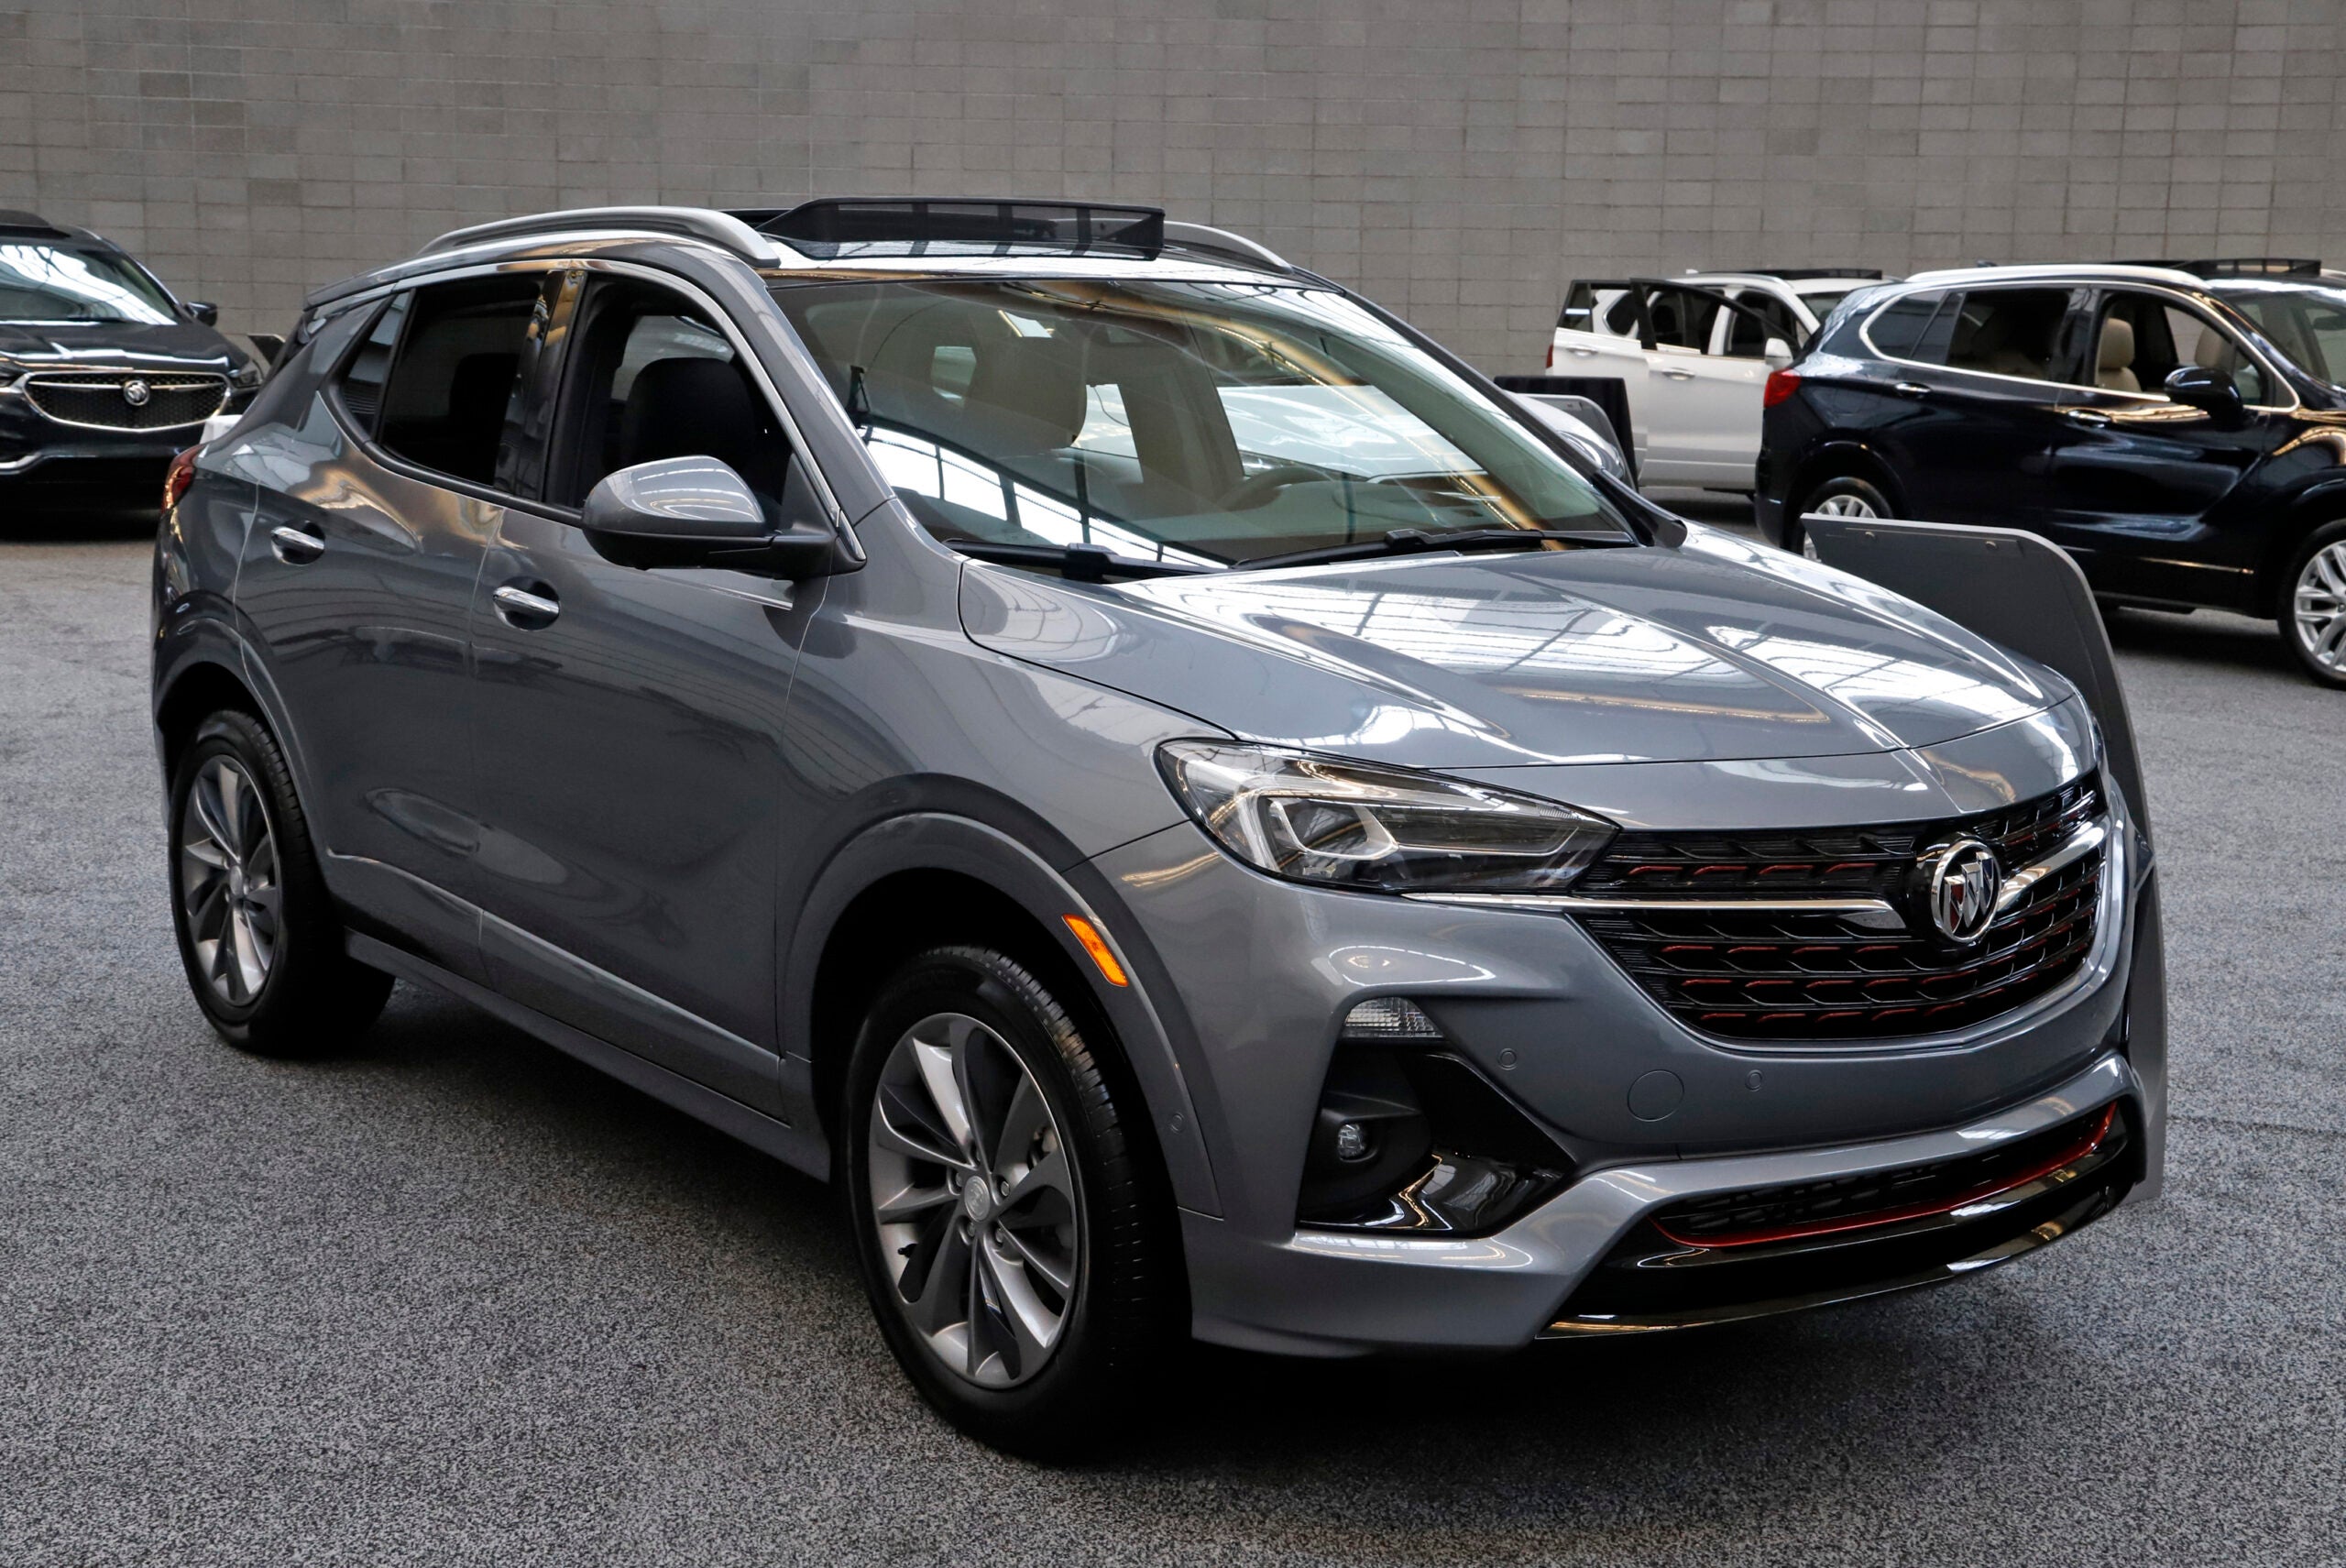 Car Doctor -- This is a 2020 Buick Encore GX Sport Touring model on display at the 2020 Pittsburgh International Auto Show Thursday, Feb.13, 2020 in Pittsburgh.